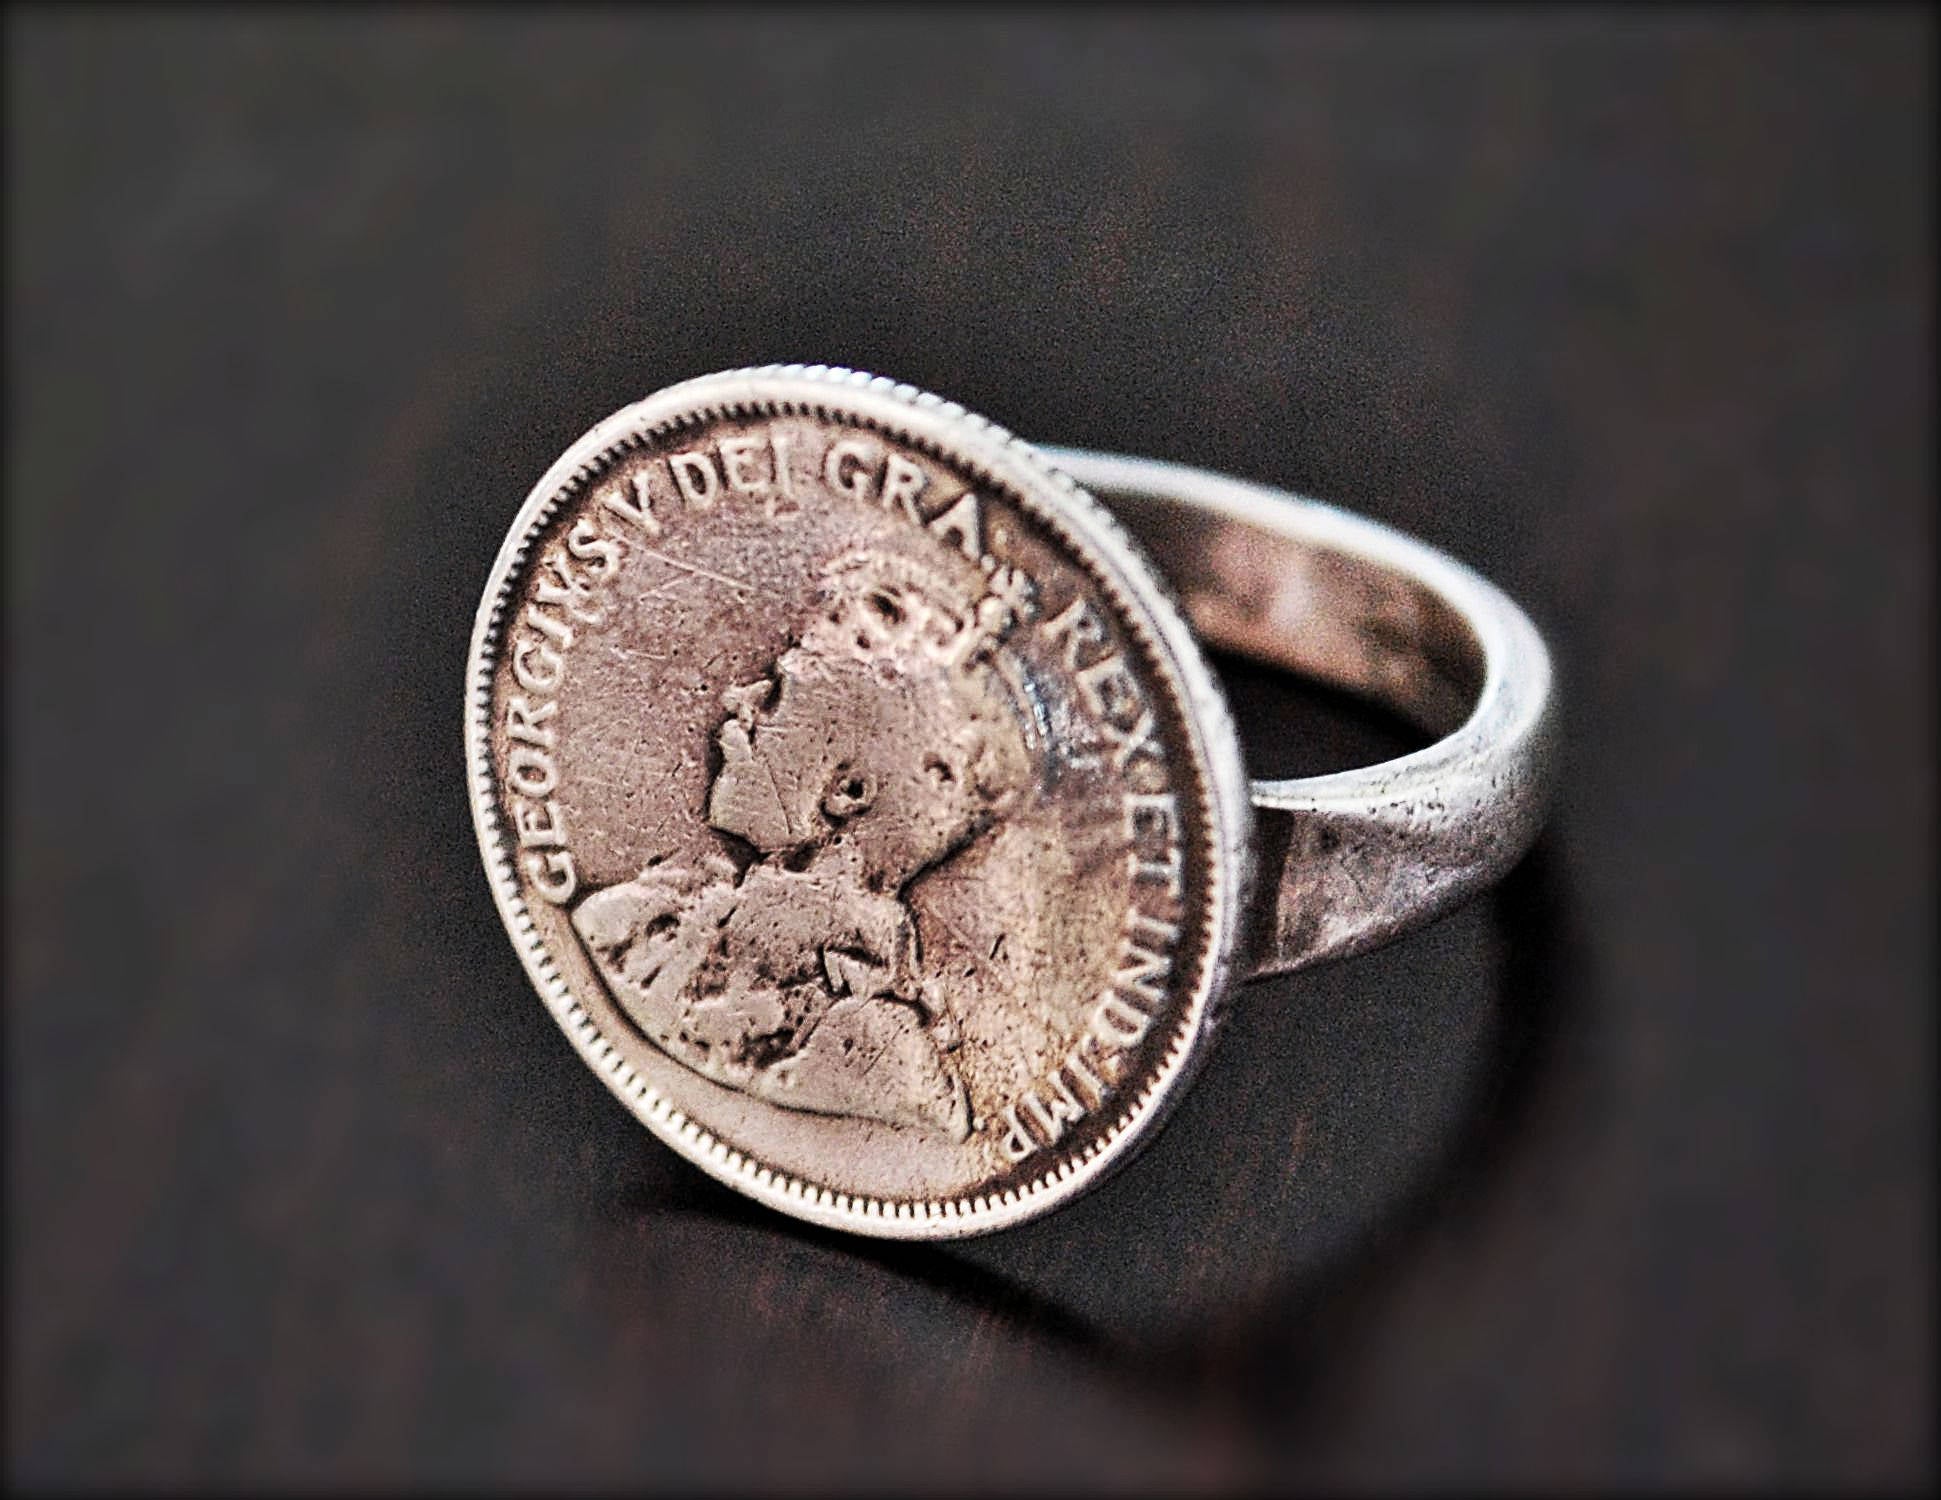 Indian Coin Ring - Size 8.5 - Indian Tribal Ring - Tribal Coin Ring - Ethnic Coin Ring - Indian Coin Jewelry - Indian Jewelry